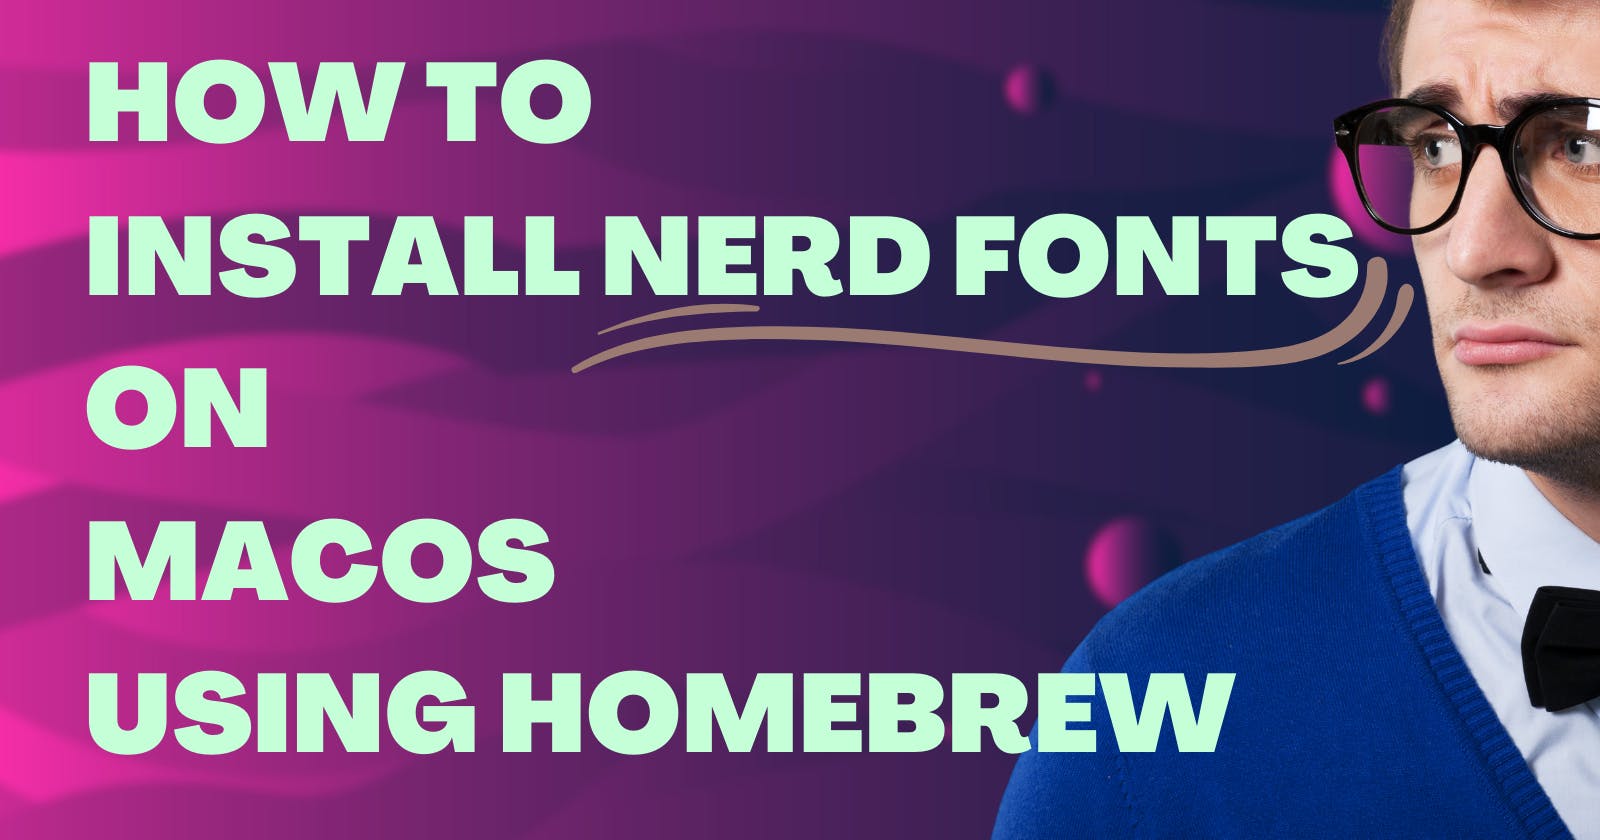 How to Install Nerd Fonts on macOS Using Homebrew